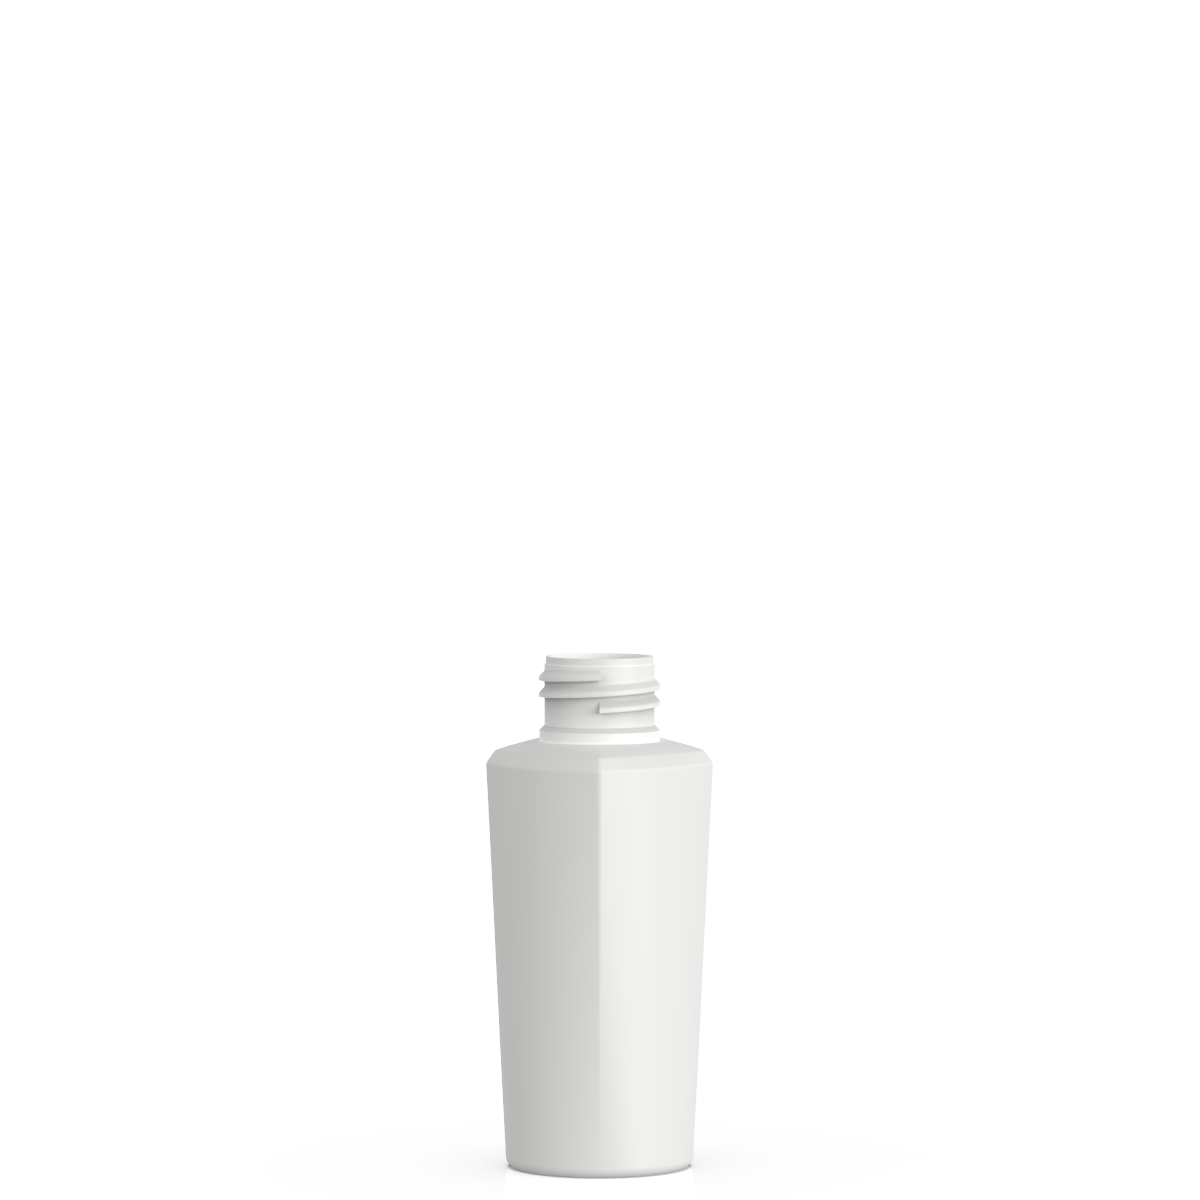 Semi-cylindrical bottle 75 ml HDPE/PP, neck 24/410, style LOS ANGELES